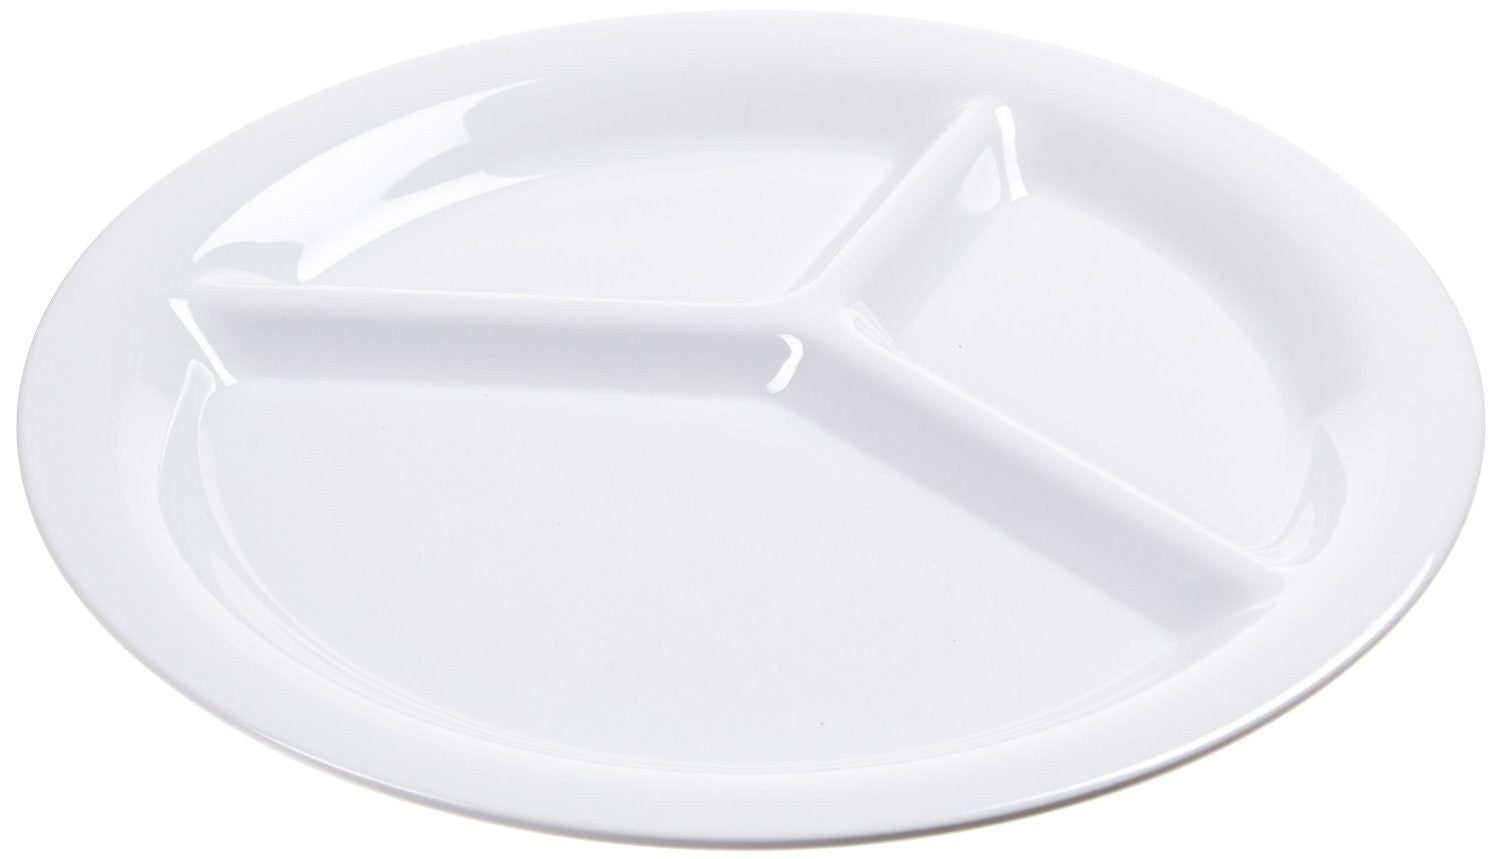 A white 3 section divided plate with barriers to help scoop the food onto your utensil